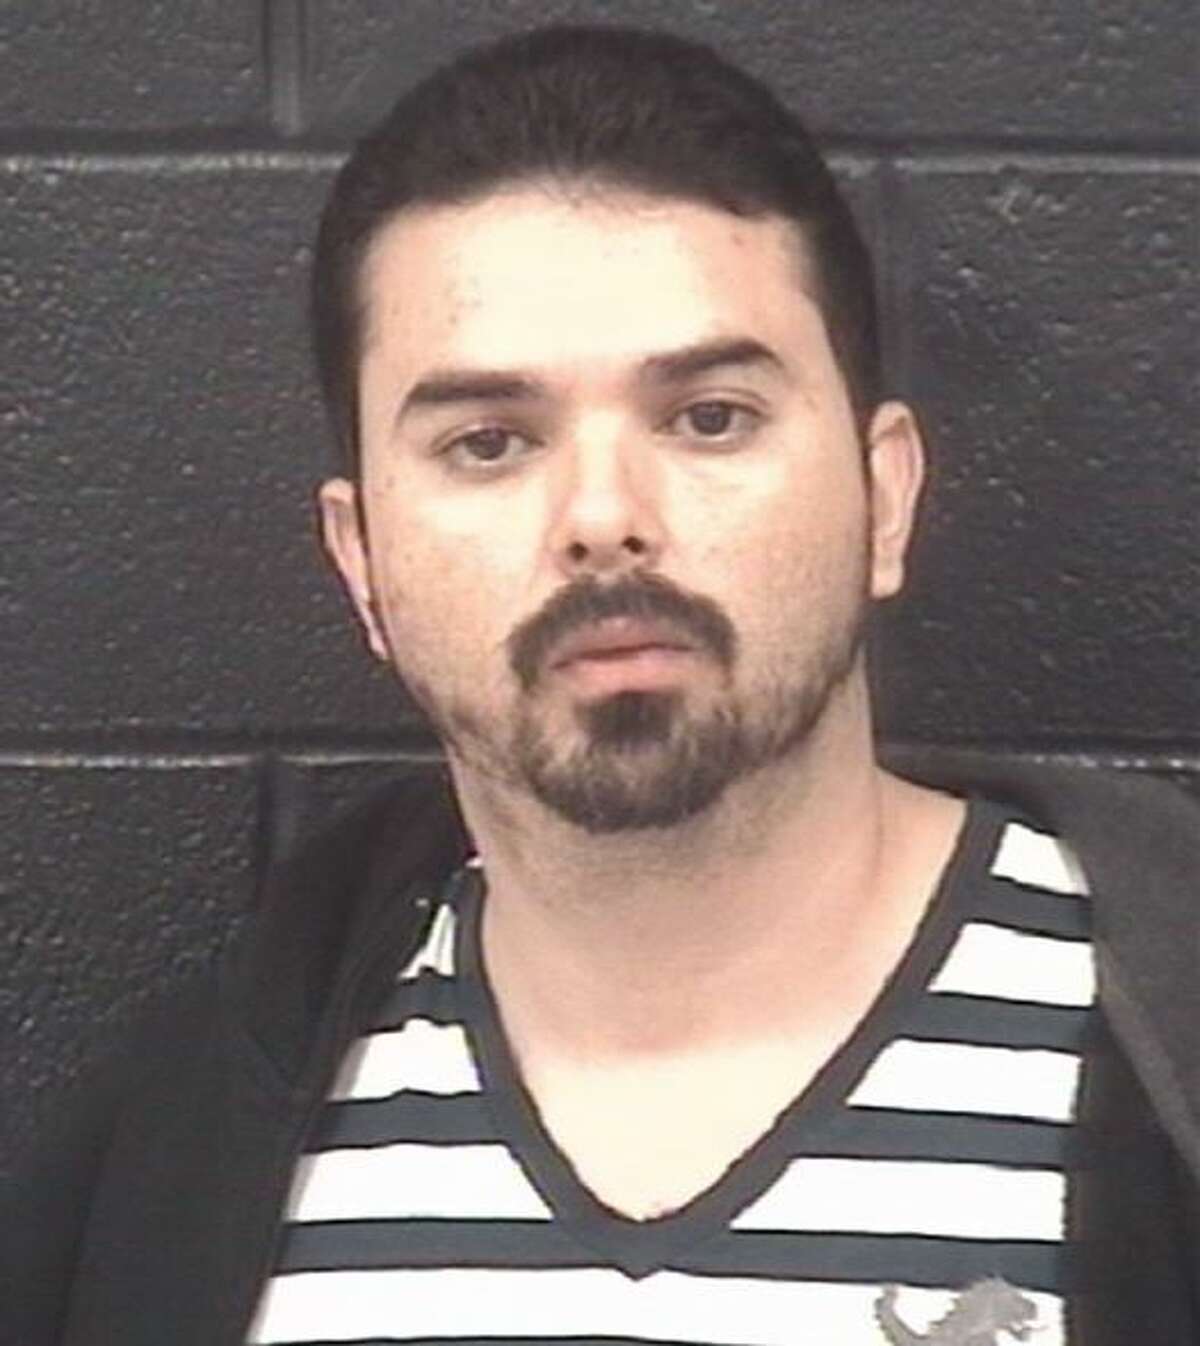 Gerardo Melendez, 34, also pleaded guilty to possession with intent to distribute cocaine.